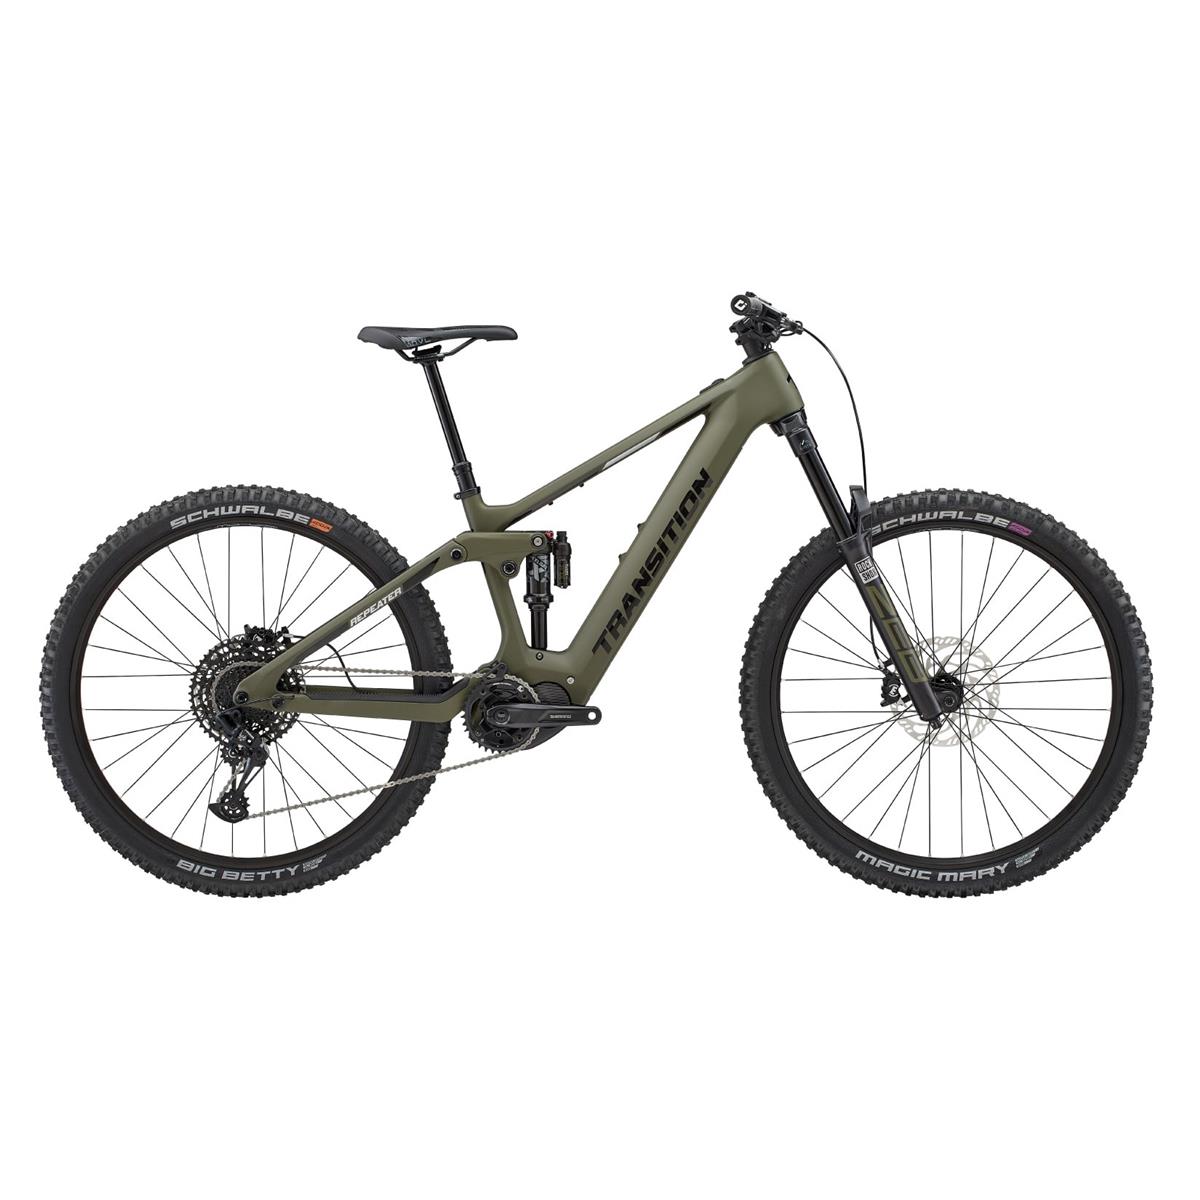 Repeater Carbon NX 29'' 160mm 12s 630Wh Shimano EP8 Mossy Green 2022 Size S